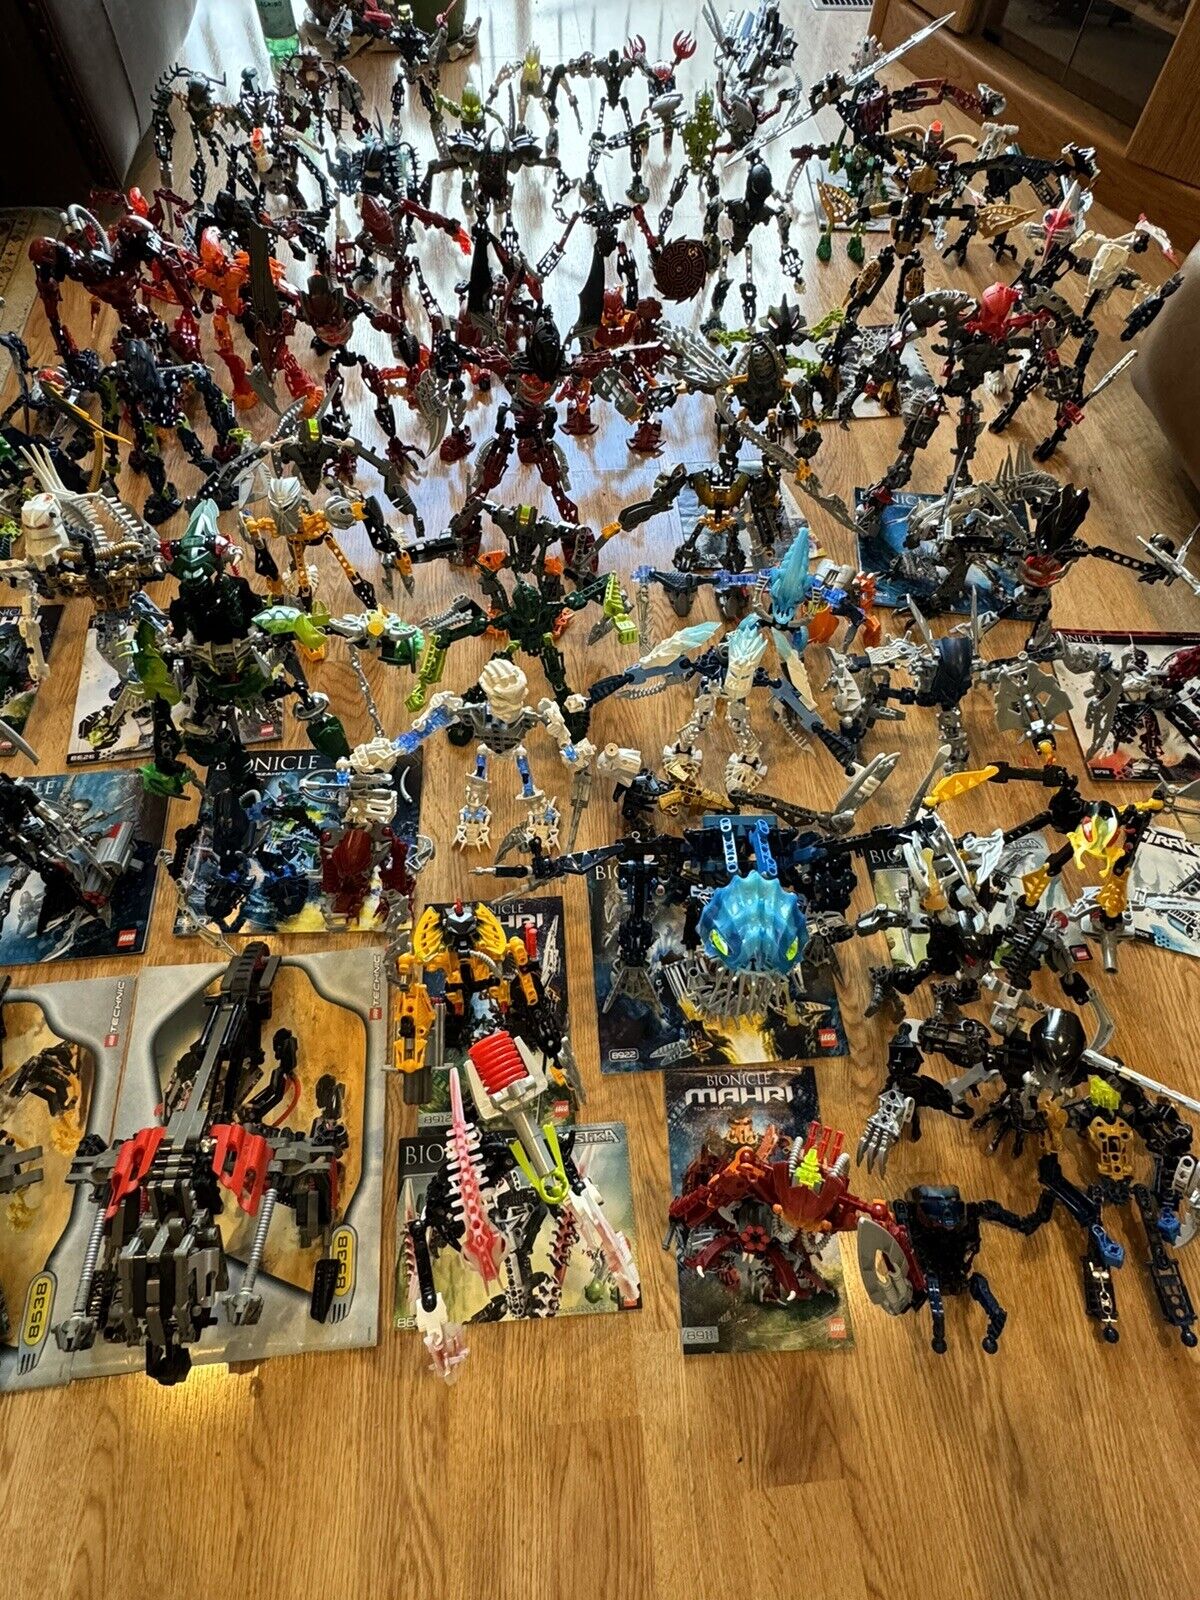 Massive Vintage Lego Bionicle Collection 40+ Figures + Accessories, Manuals